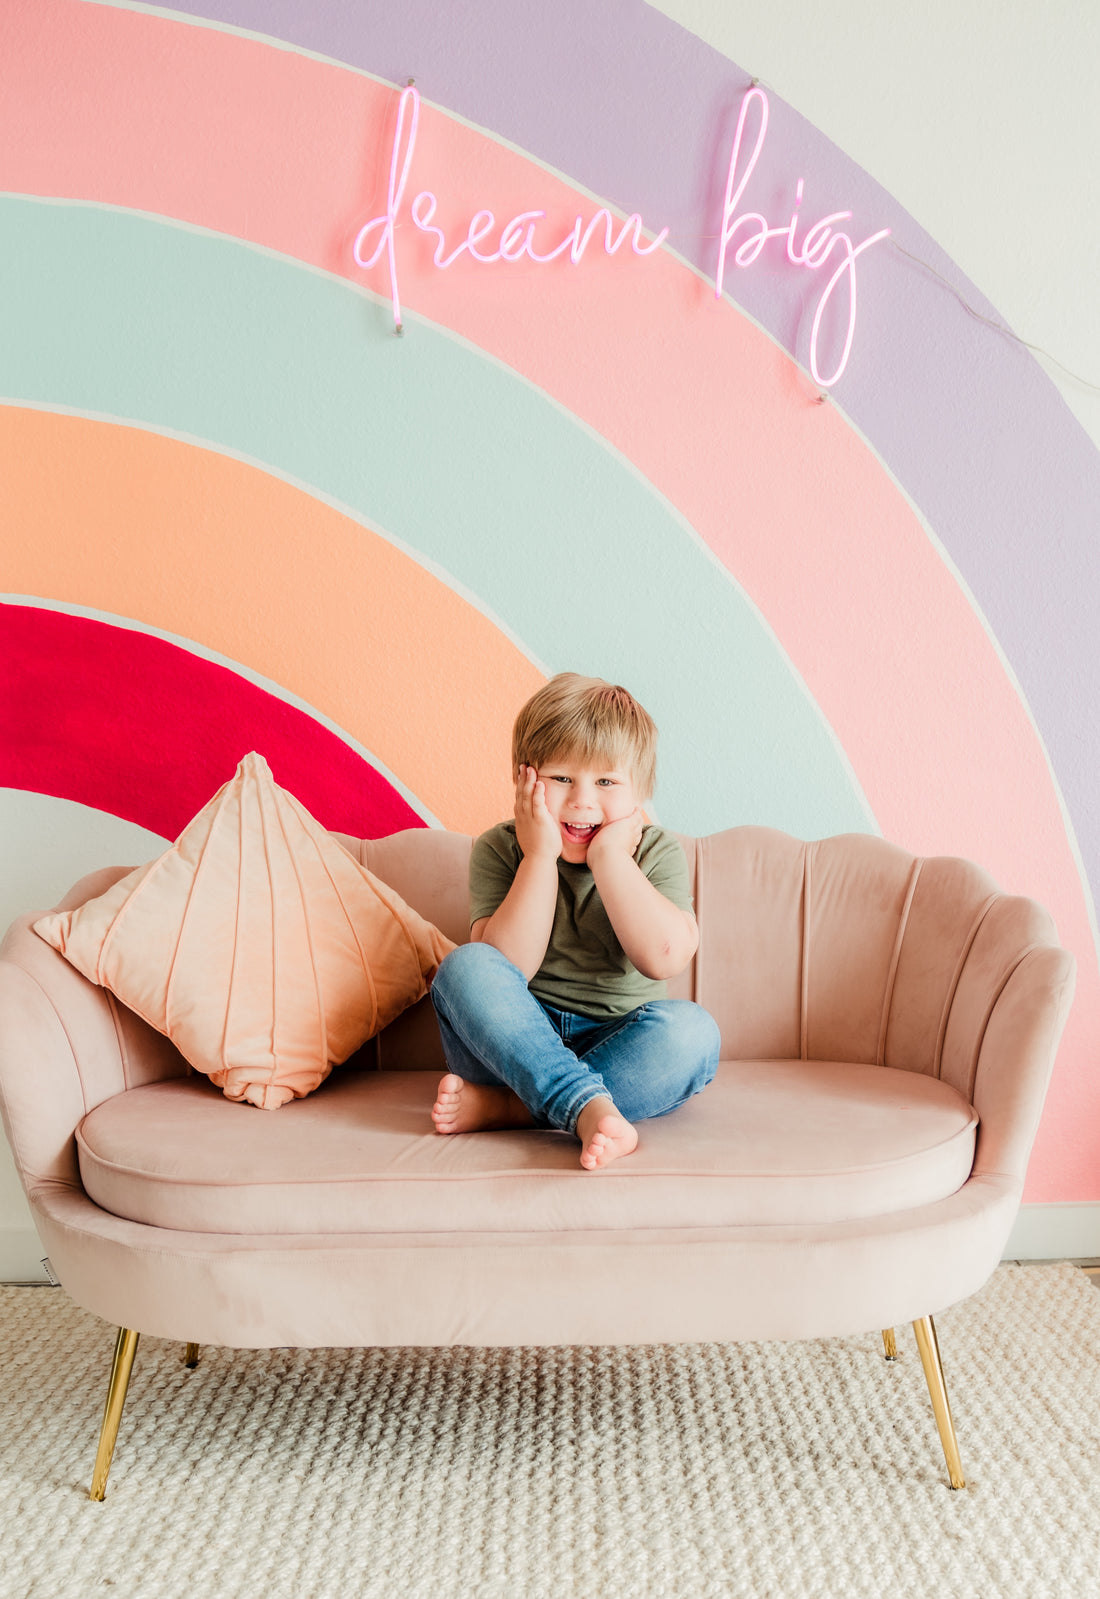 Kids' Furniture Trends for 2023: A Look at What's In